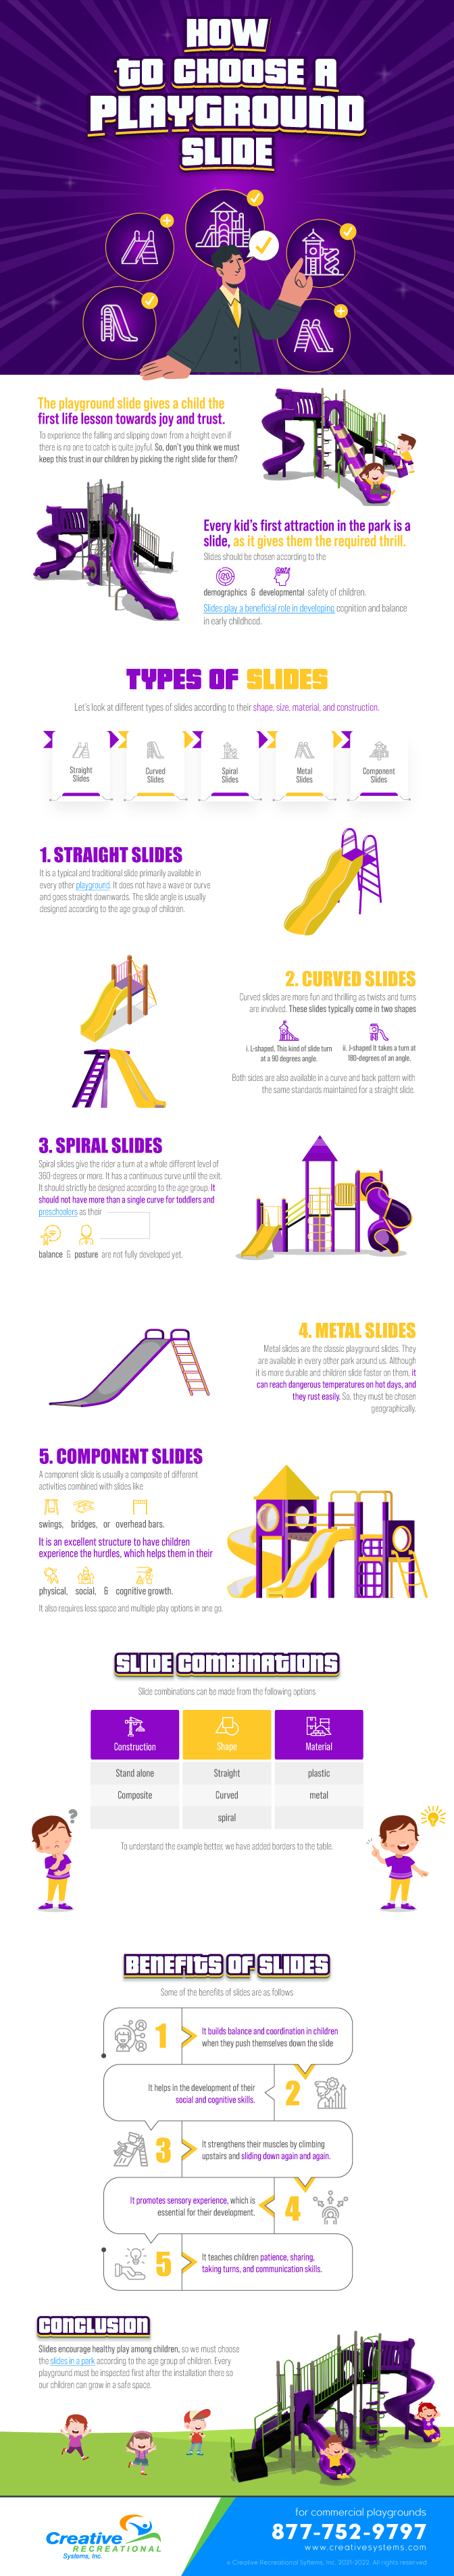 How-To-Choose-A-Playground-Slide